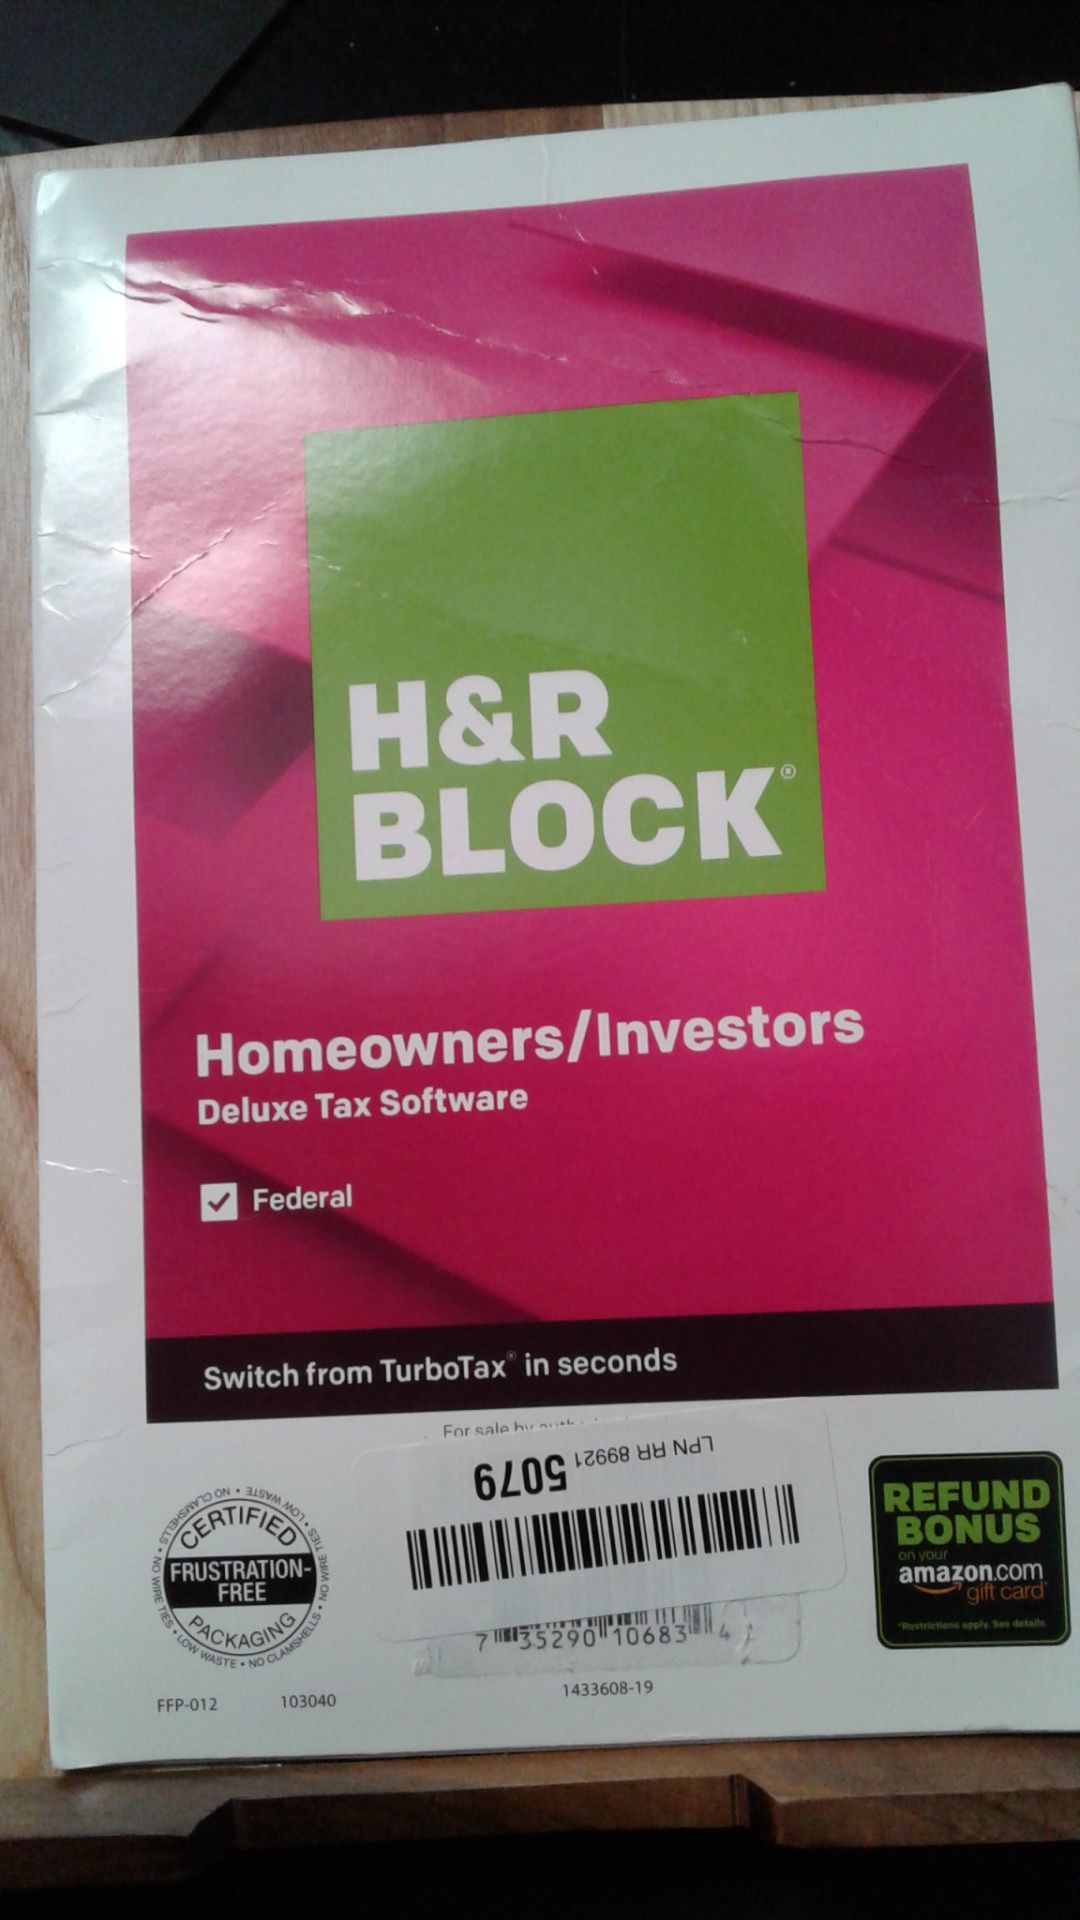 2019 H & R BLOCK HOMEOWNERS/investors deluxe tax software